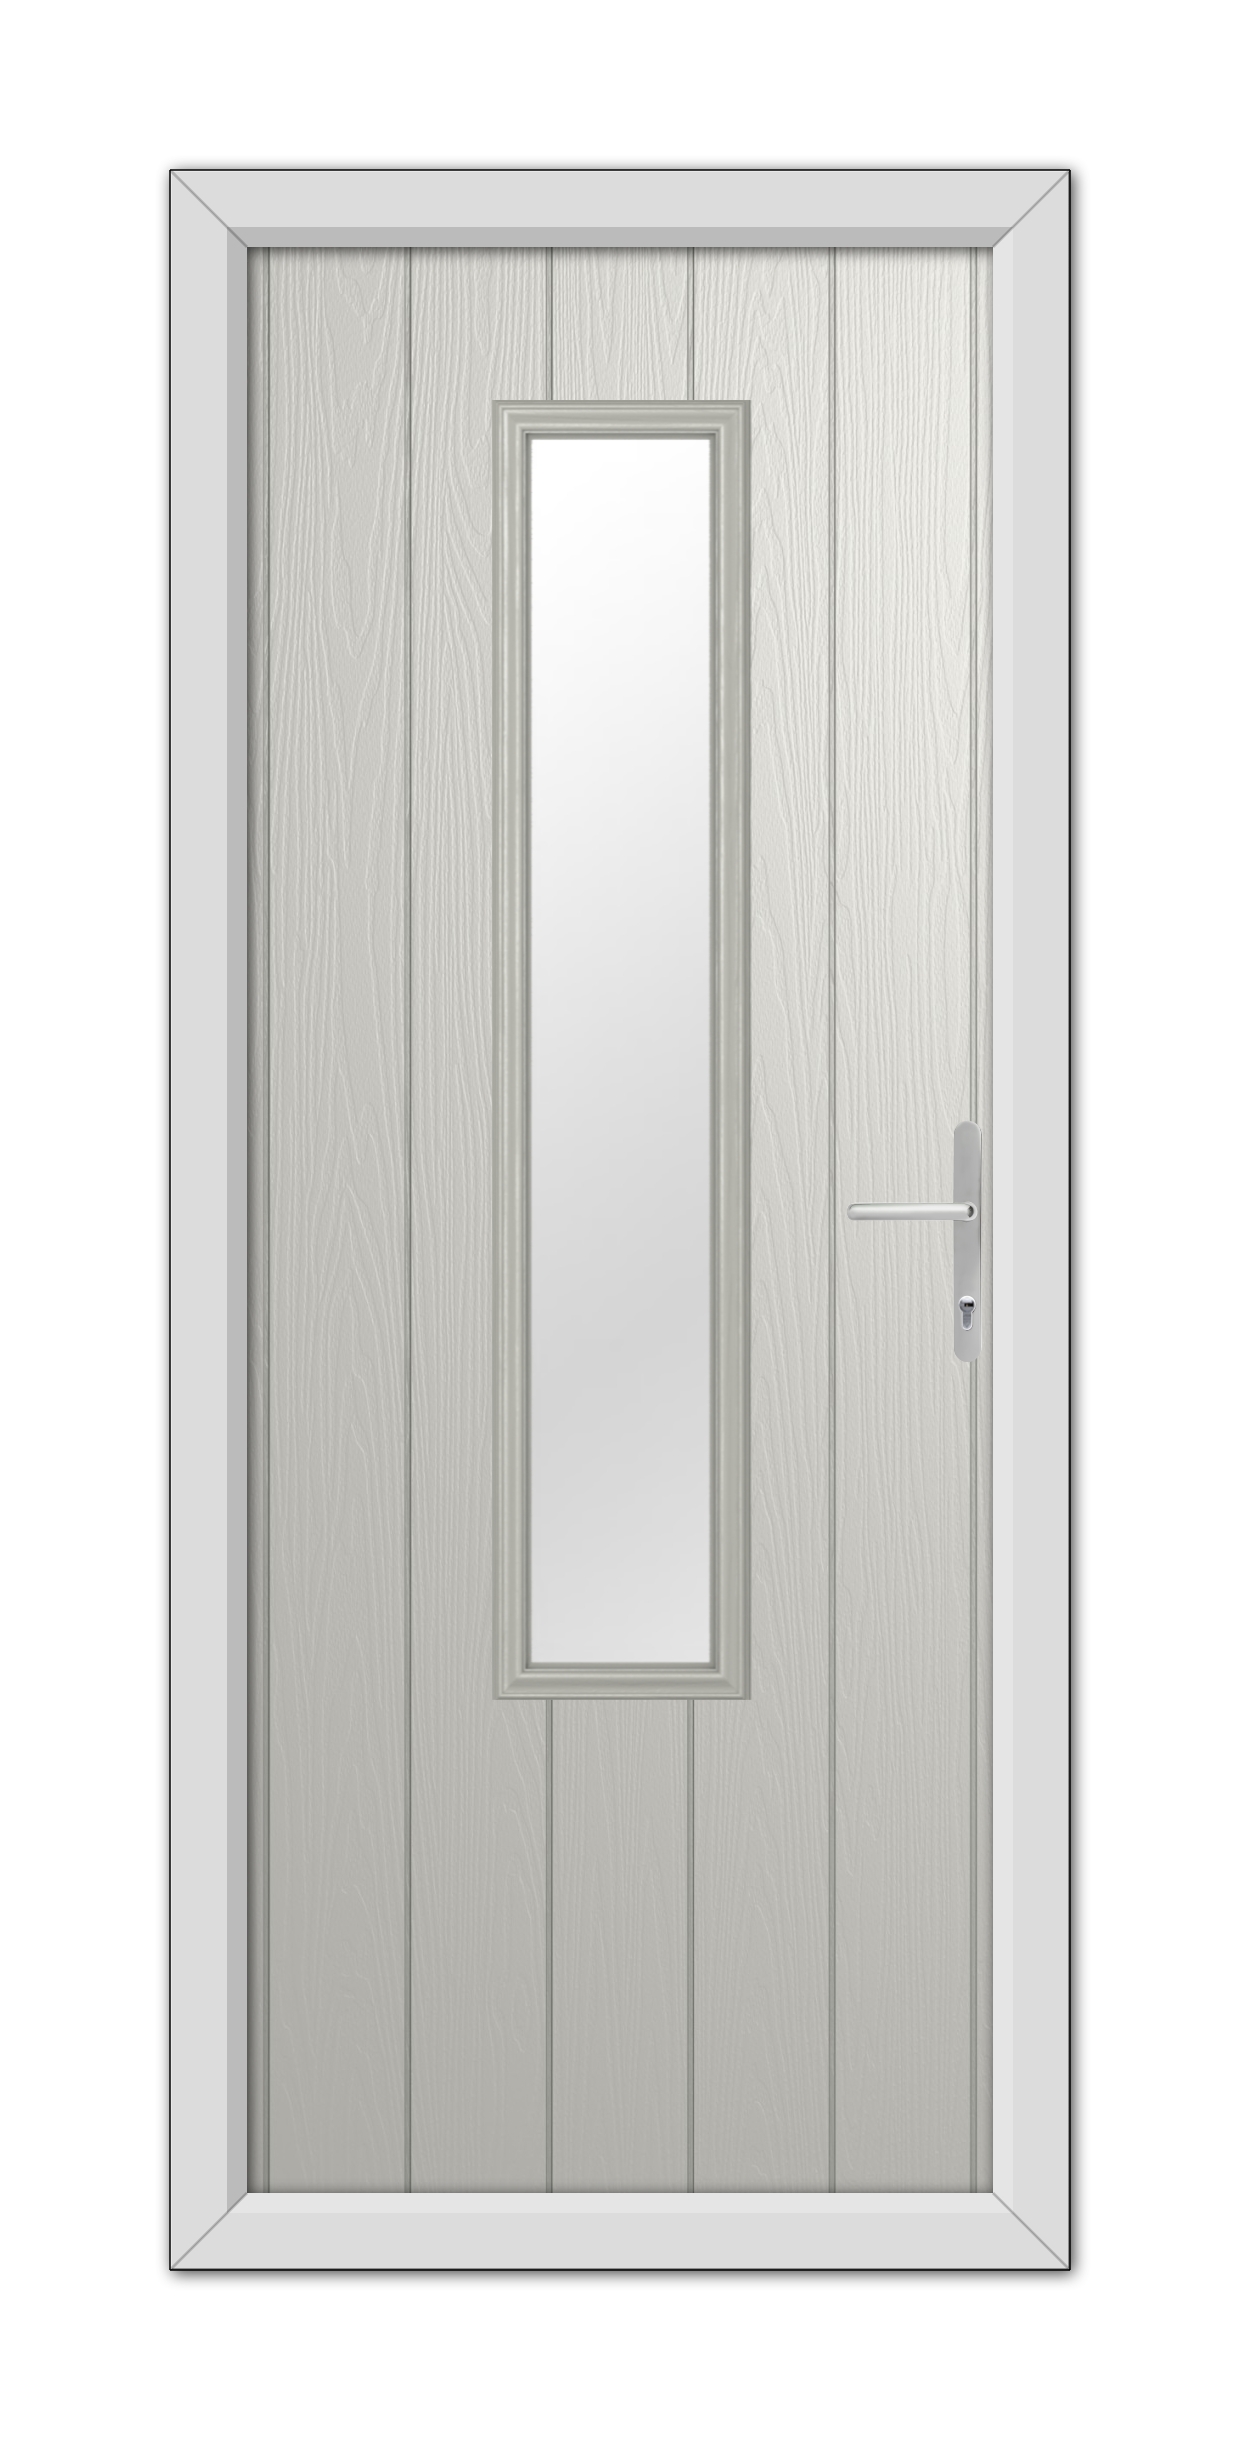 A Agate Grey Abercorn Composite Door 48mm Timber Core with a vertical rectangular window and a metal handle, set within a white frame.